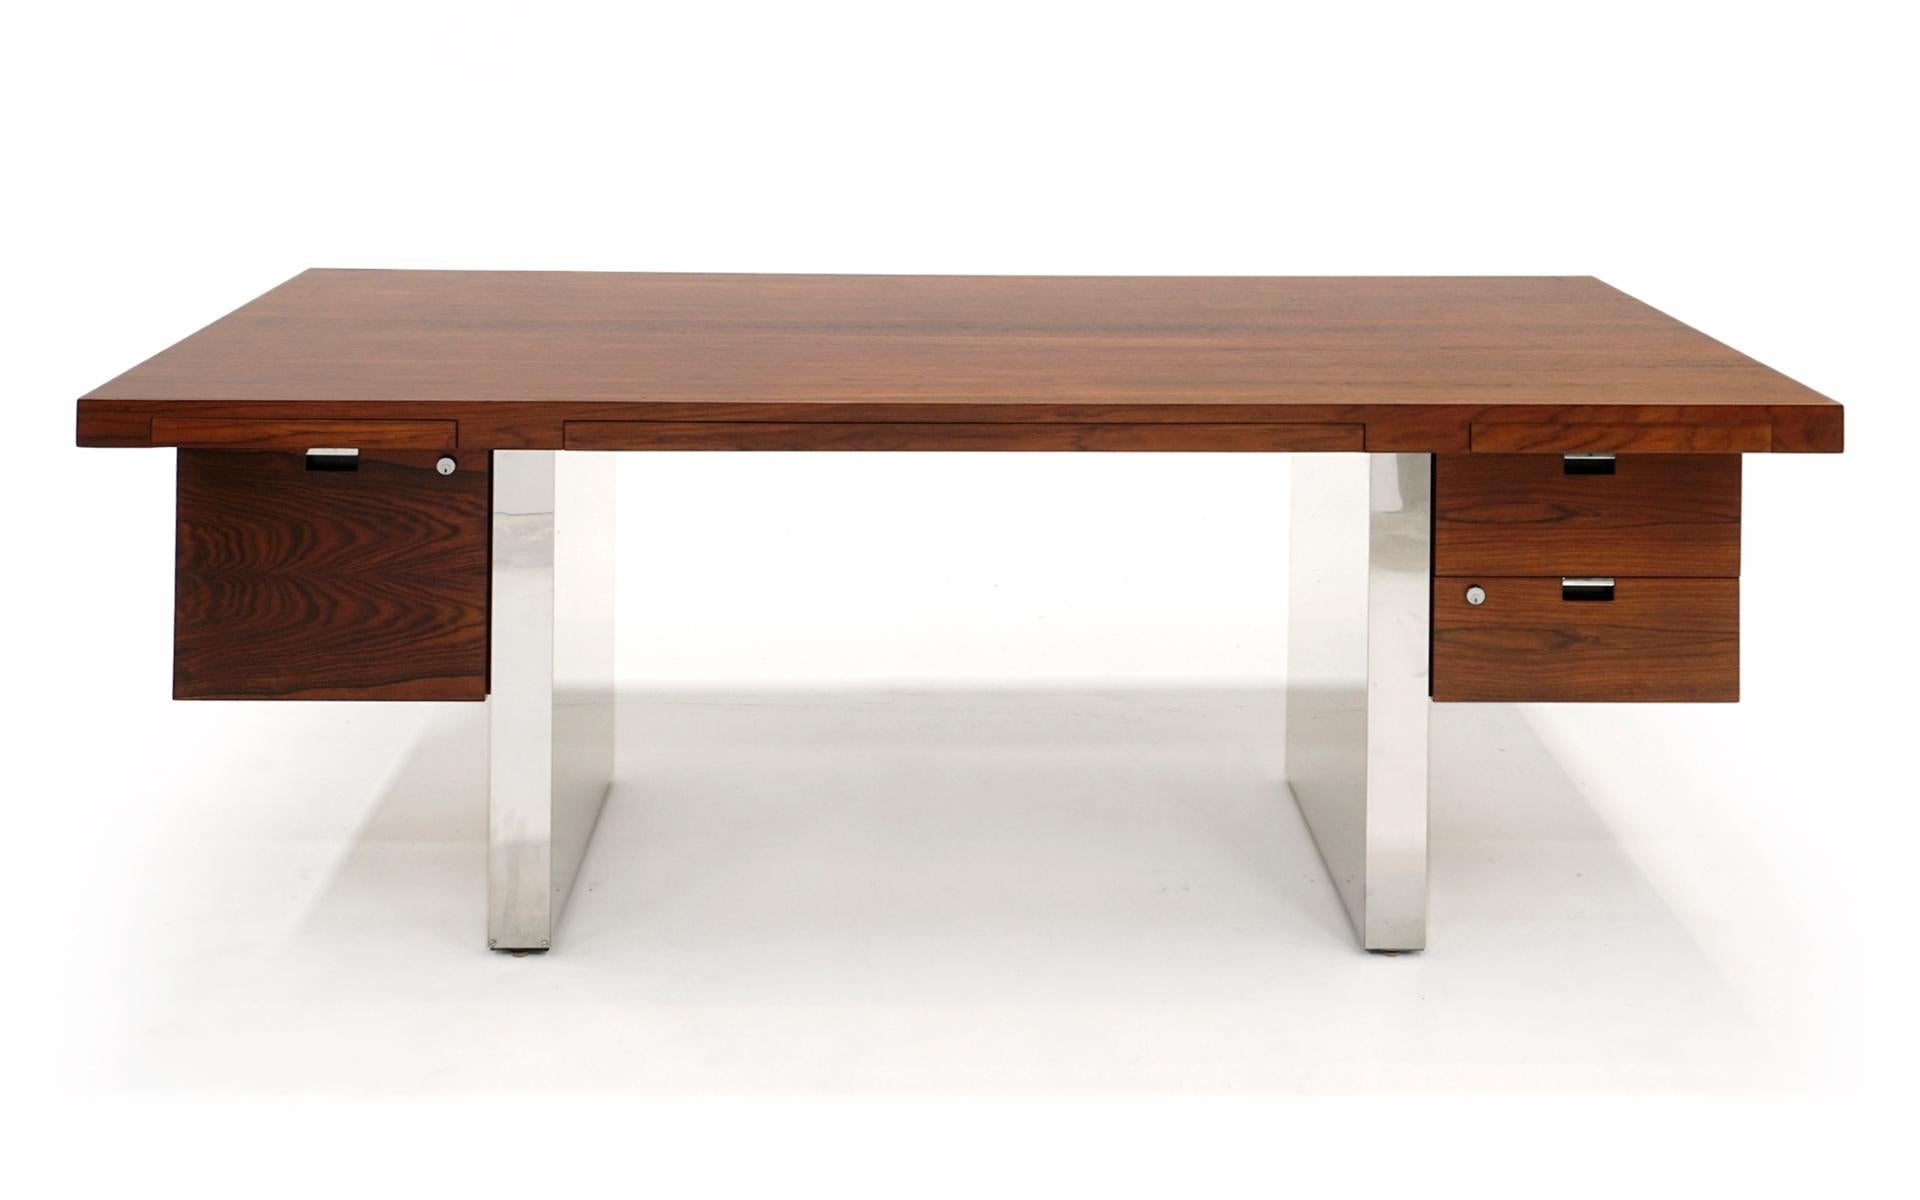 Brazilian rosewood and aluminum floating top desk by Roger Sprunger for Dunbar.  Three shallow drawers are carved out of the desk top: two side drawers and one wide center drawer.  In addition there are suspended deeper drawers on each side for